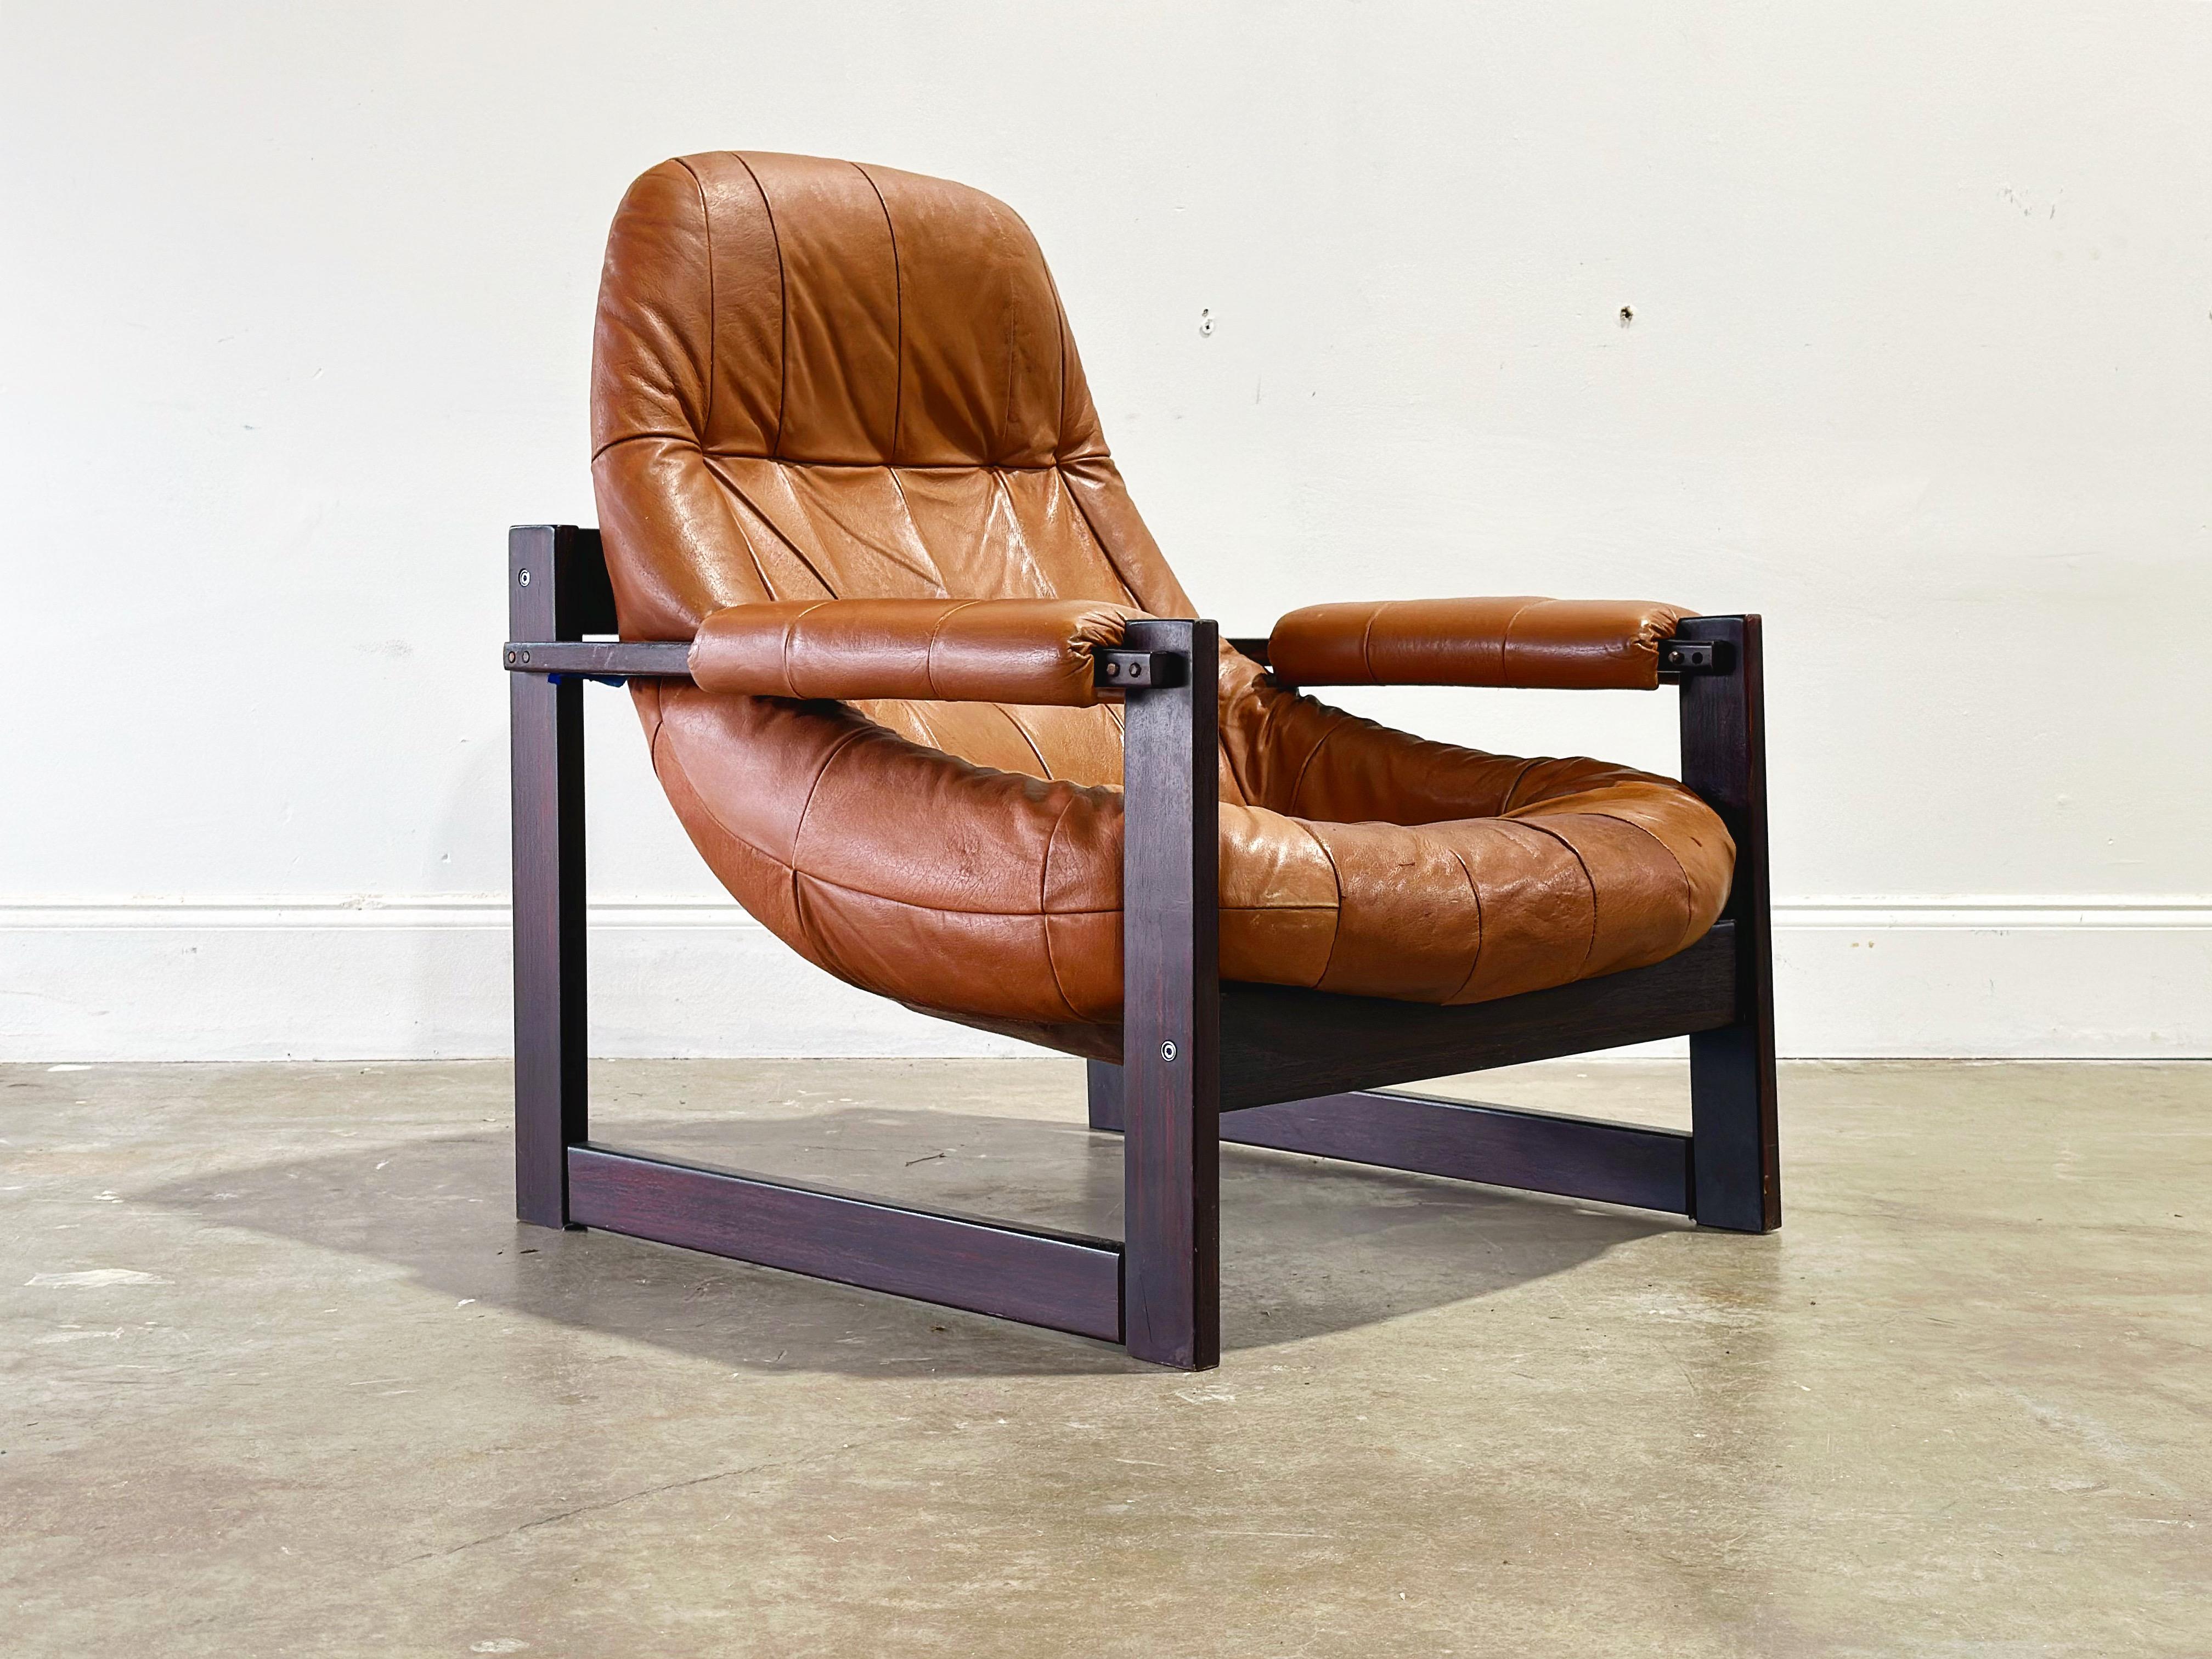 Late 20th Century Percival Lafer Earth Chair, Cognac Leather + Jacaranda Wood Midcentury Lounge